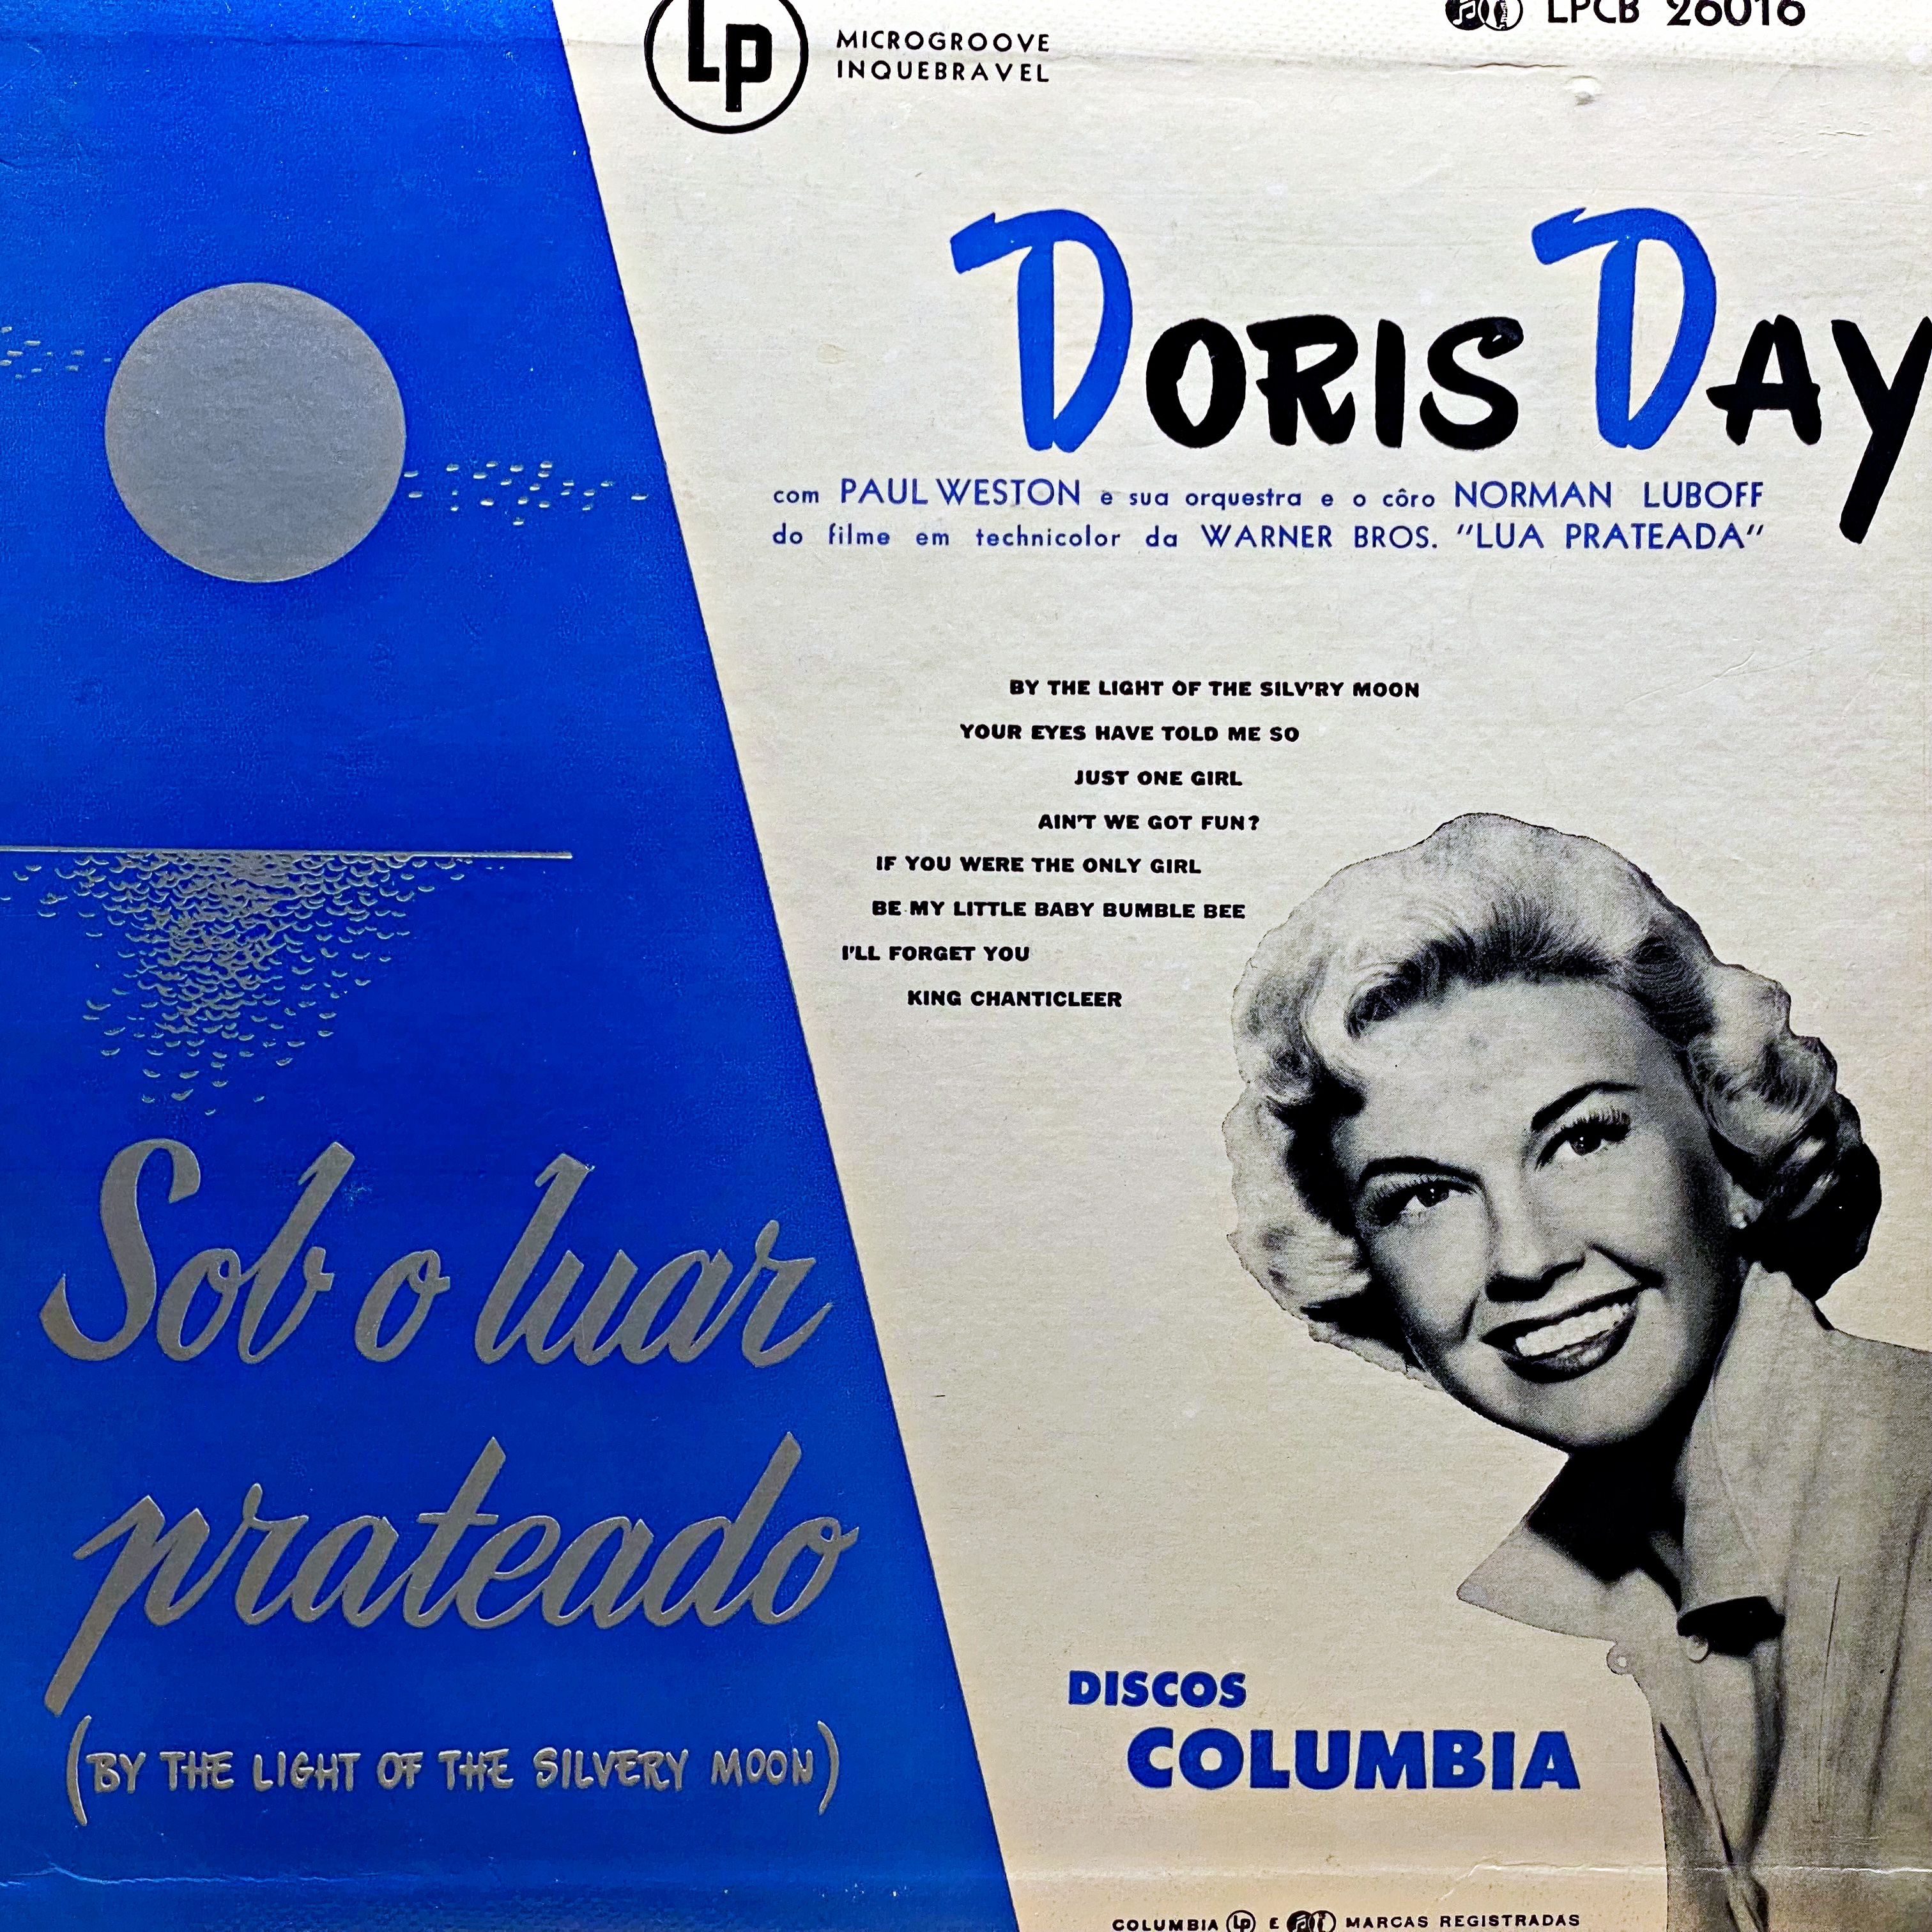 10" Doris Day, Paul Weston And His Orchestra - By The Light Of The Silvery Moon